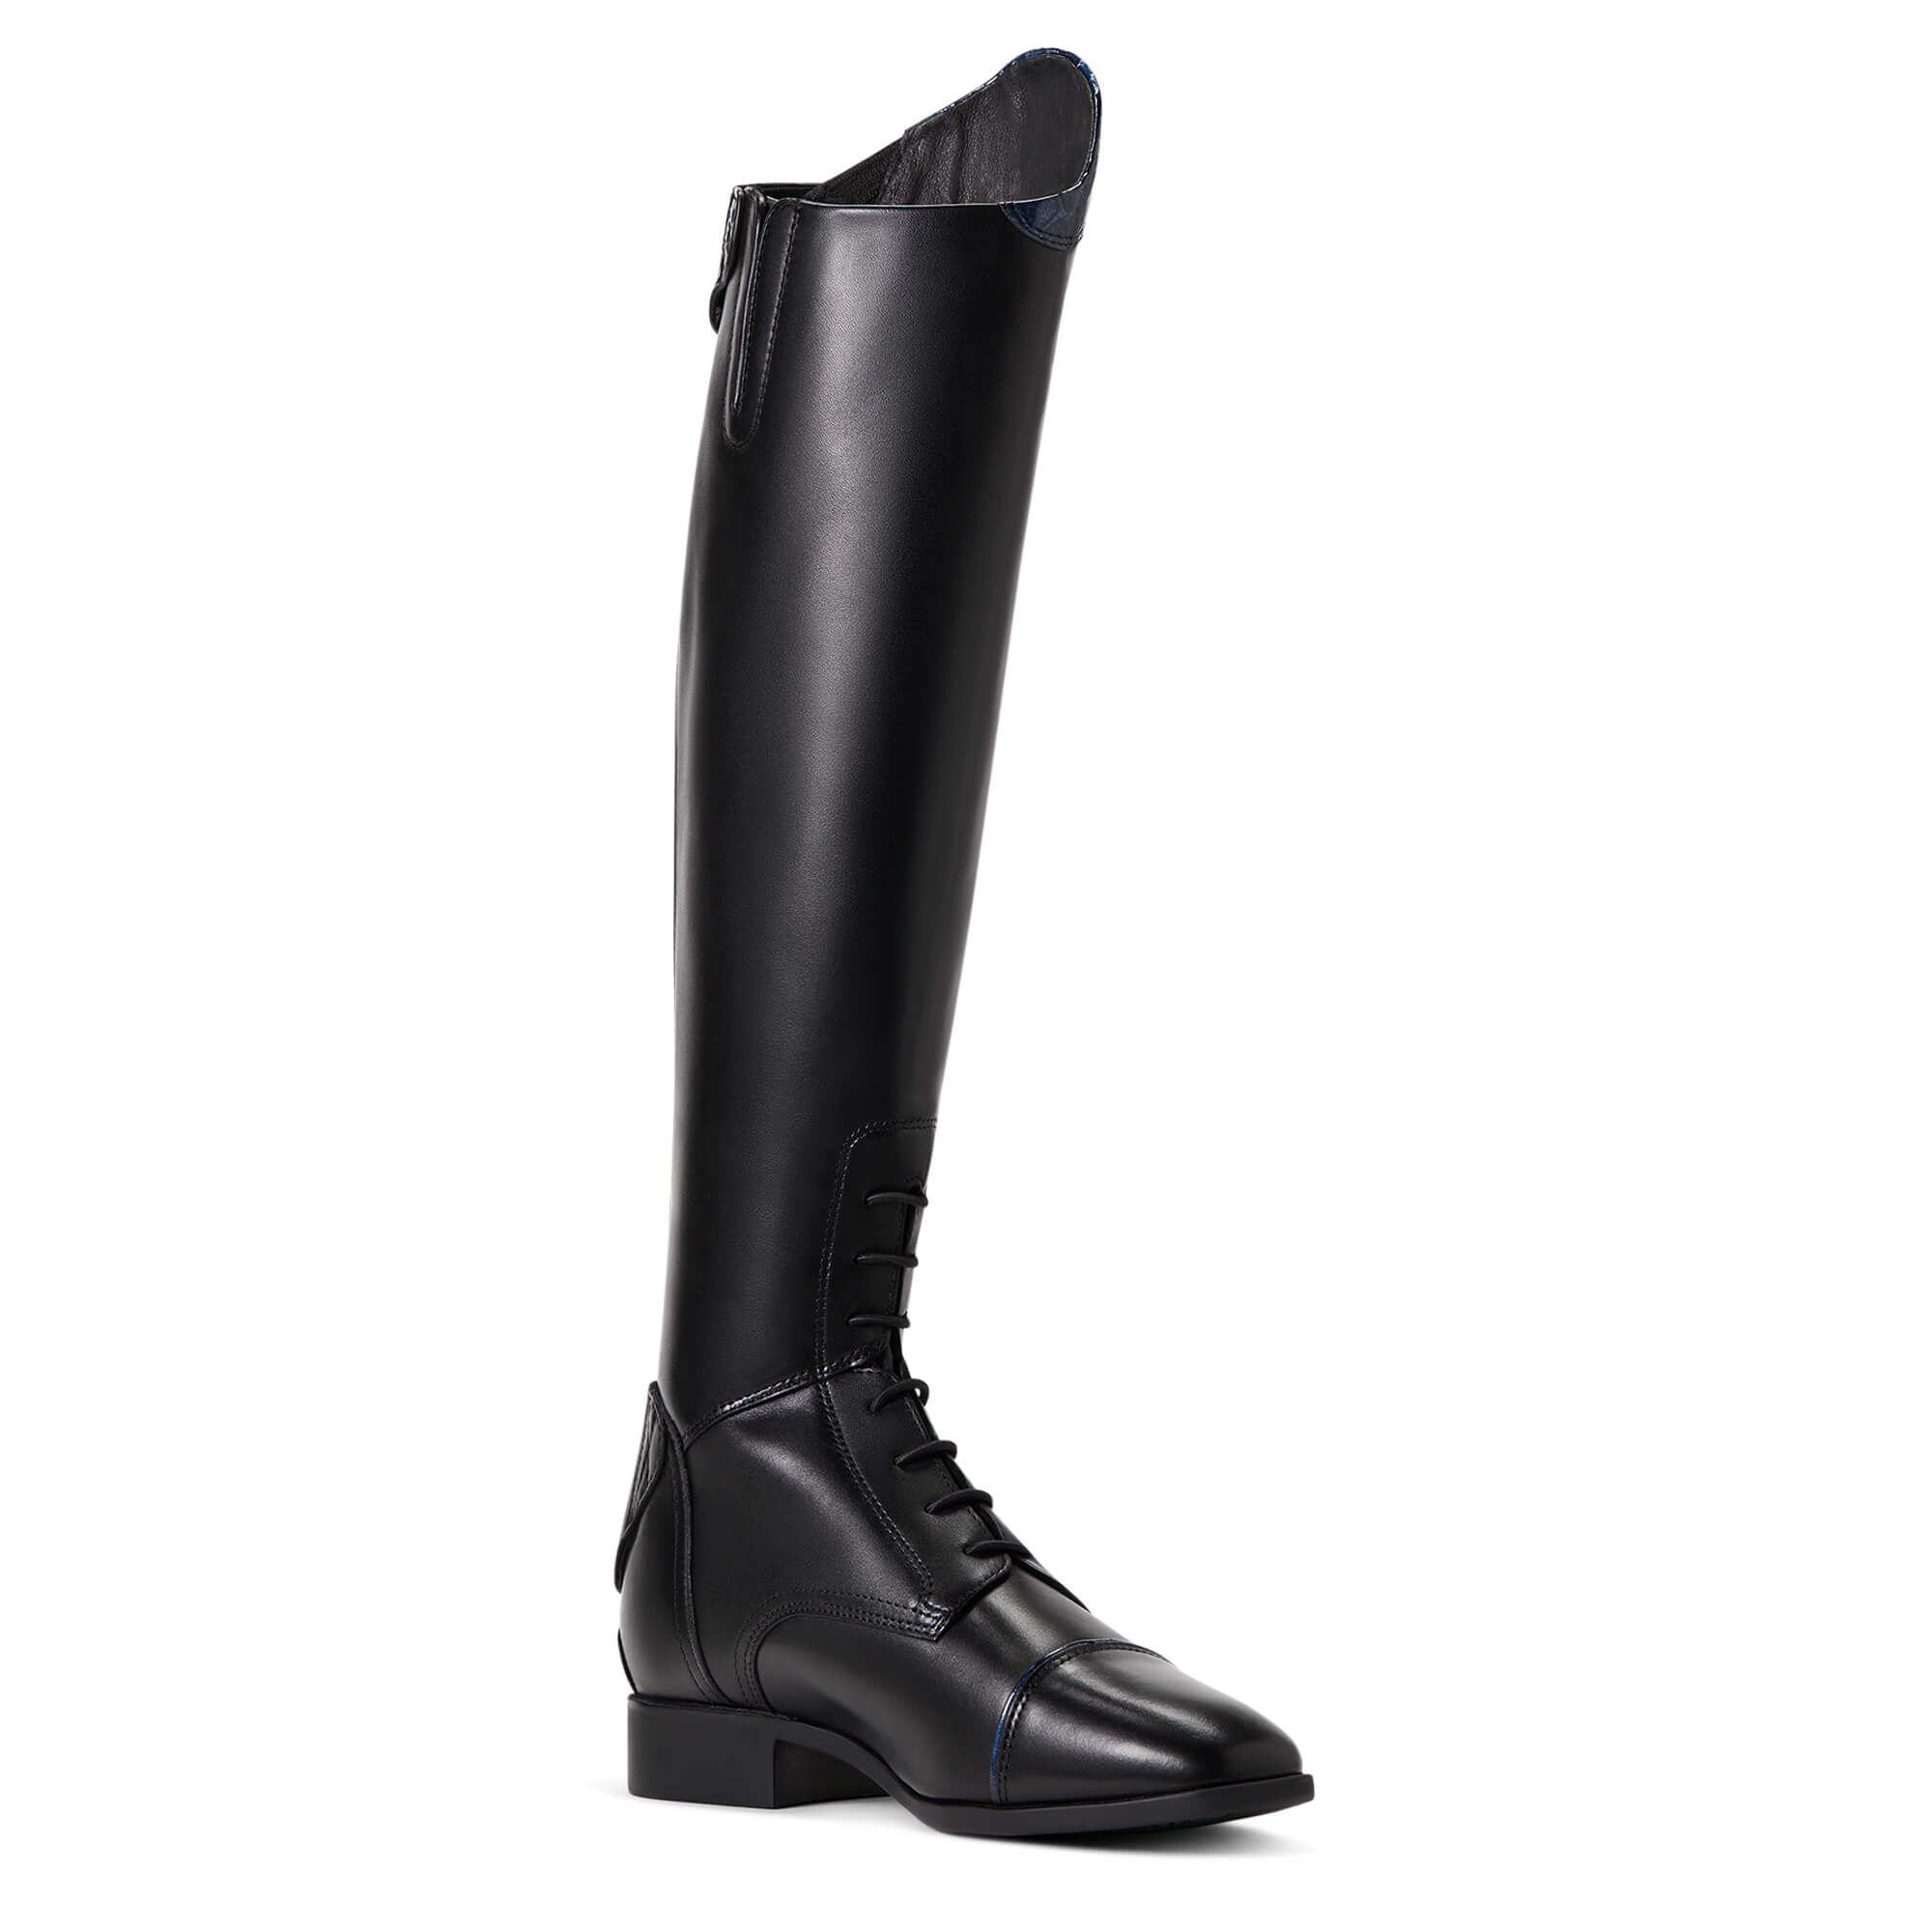 Ariat ARIAT PALISADE ELLIPSE TALL BOOT LONG LEATHER RIDING BOOTS 